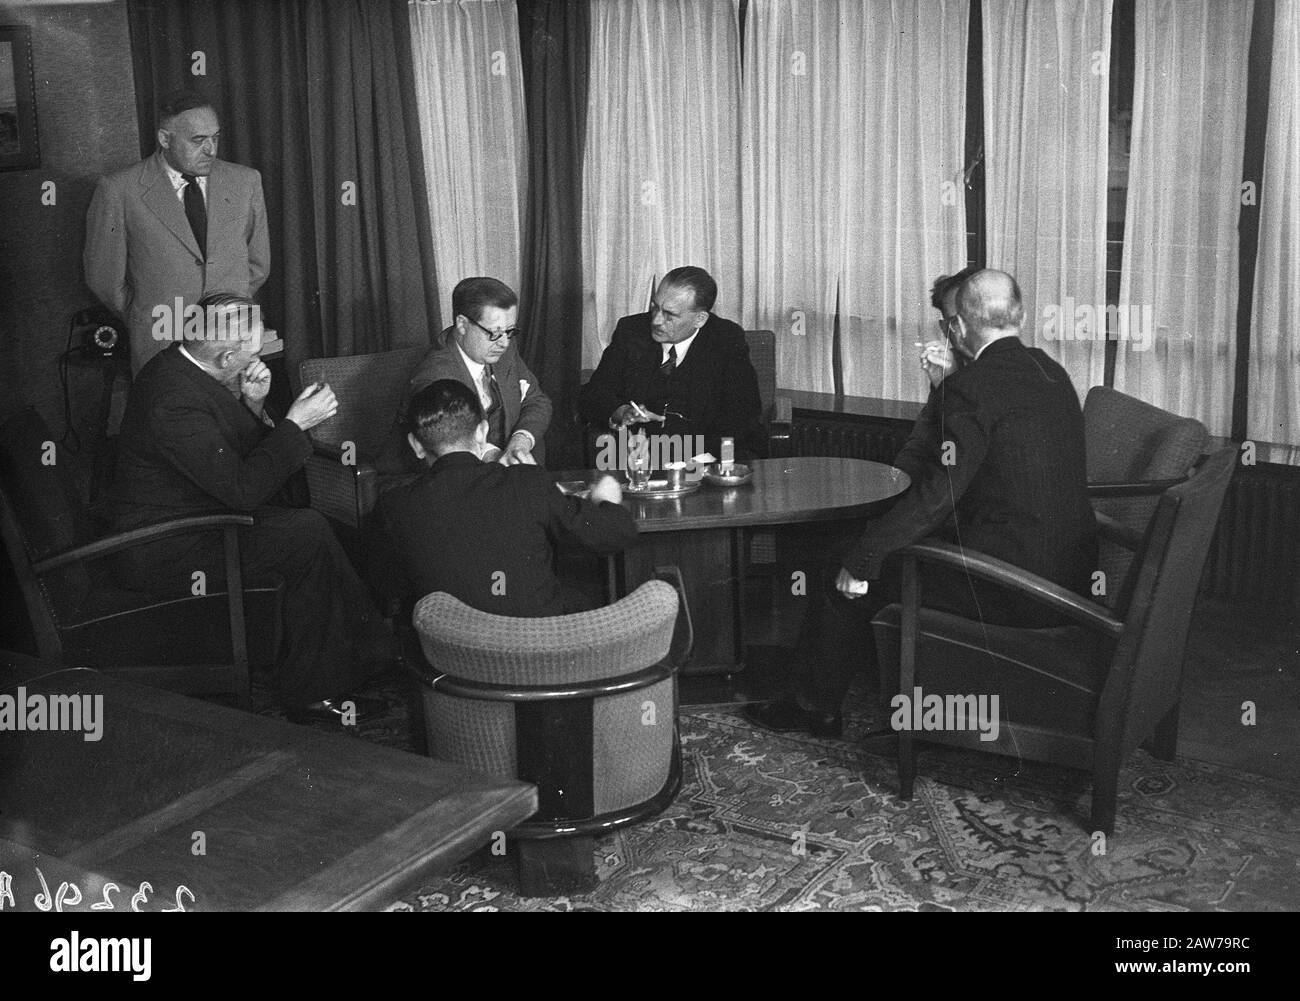 Signature Belgian-Dutch treaty Wederzijdigheid Social Insurance. Minister Drees with the Belgian Minister L. E. Troclet and officials for the signing date: August 29, 1947 Location: The Hague Keywords: international agreements, ministers Person Name: Drees, Willem (sr.), Troclet. L. E. Stock Photo